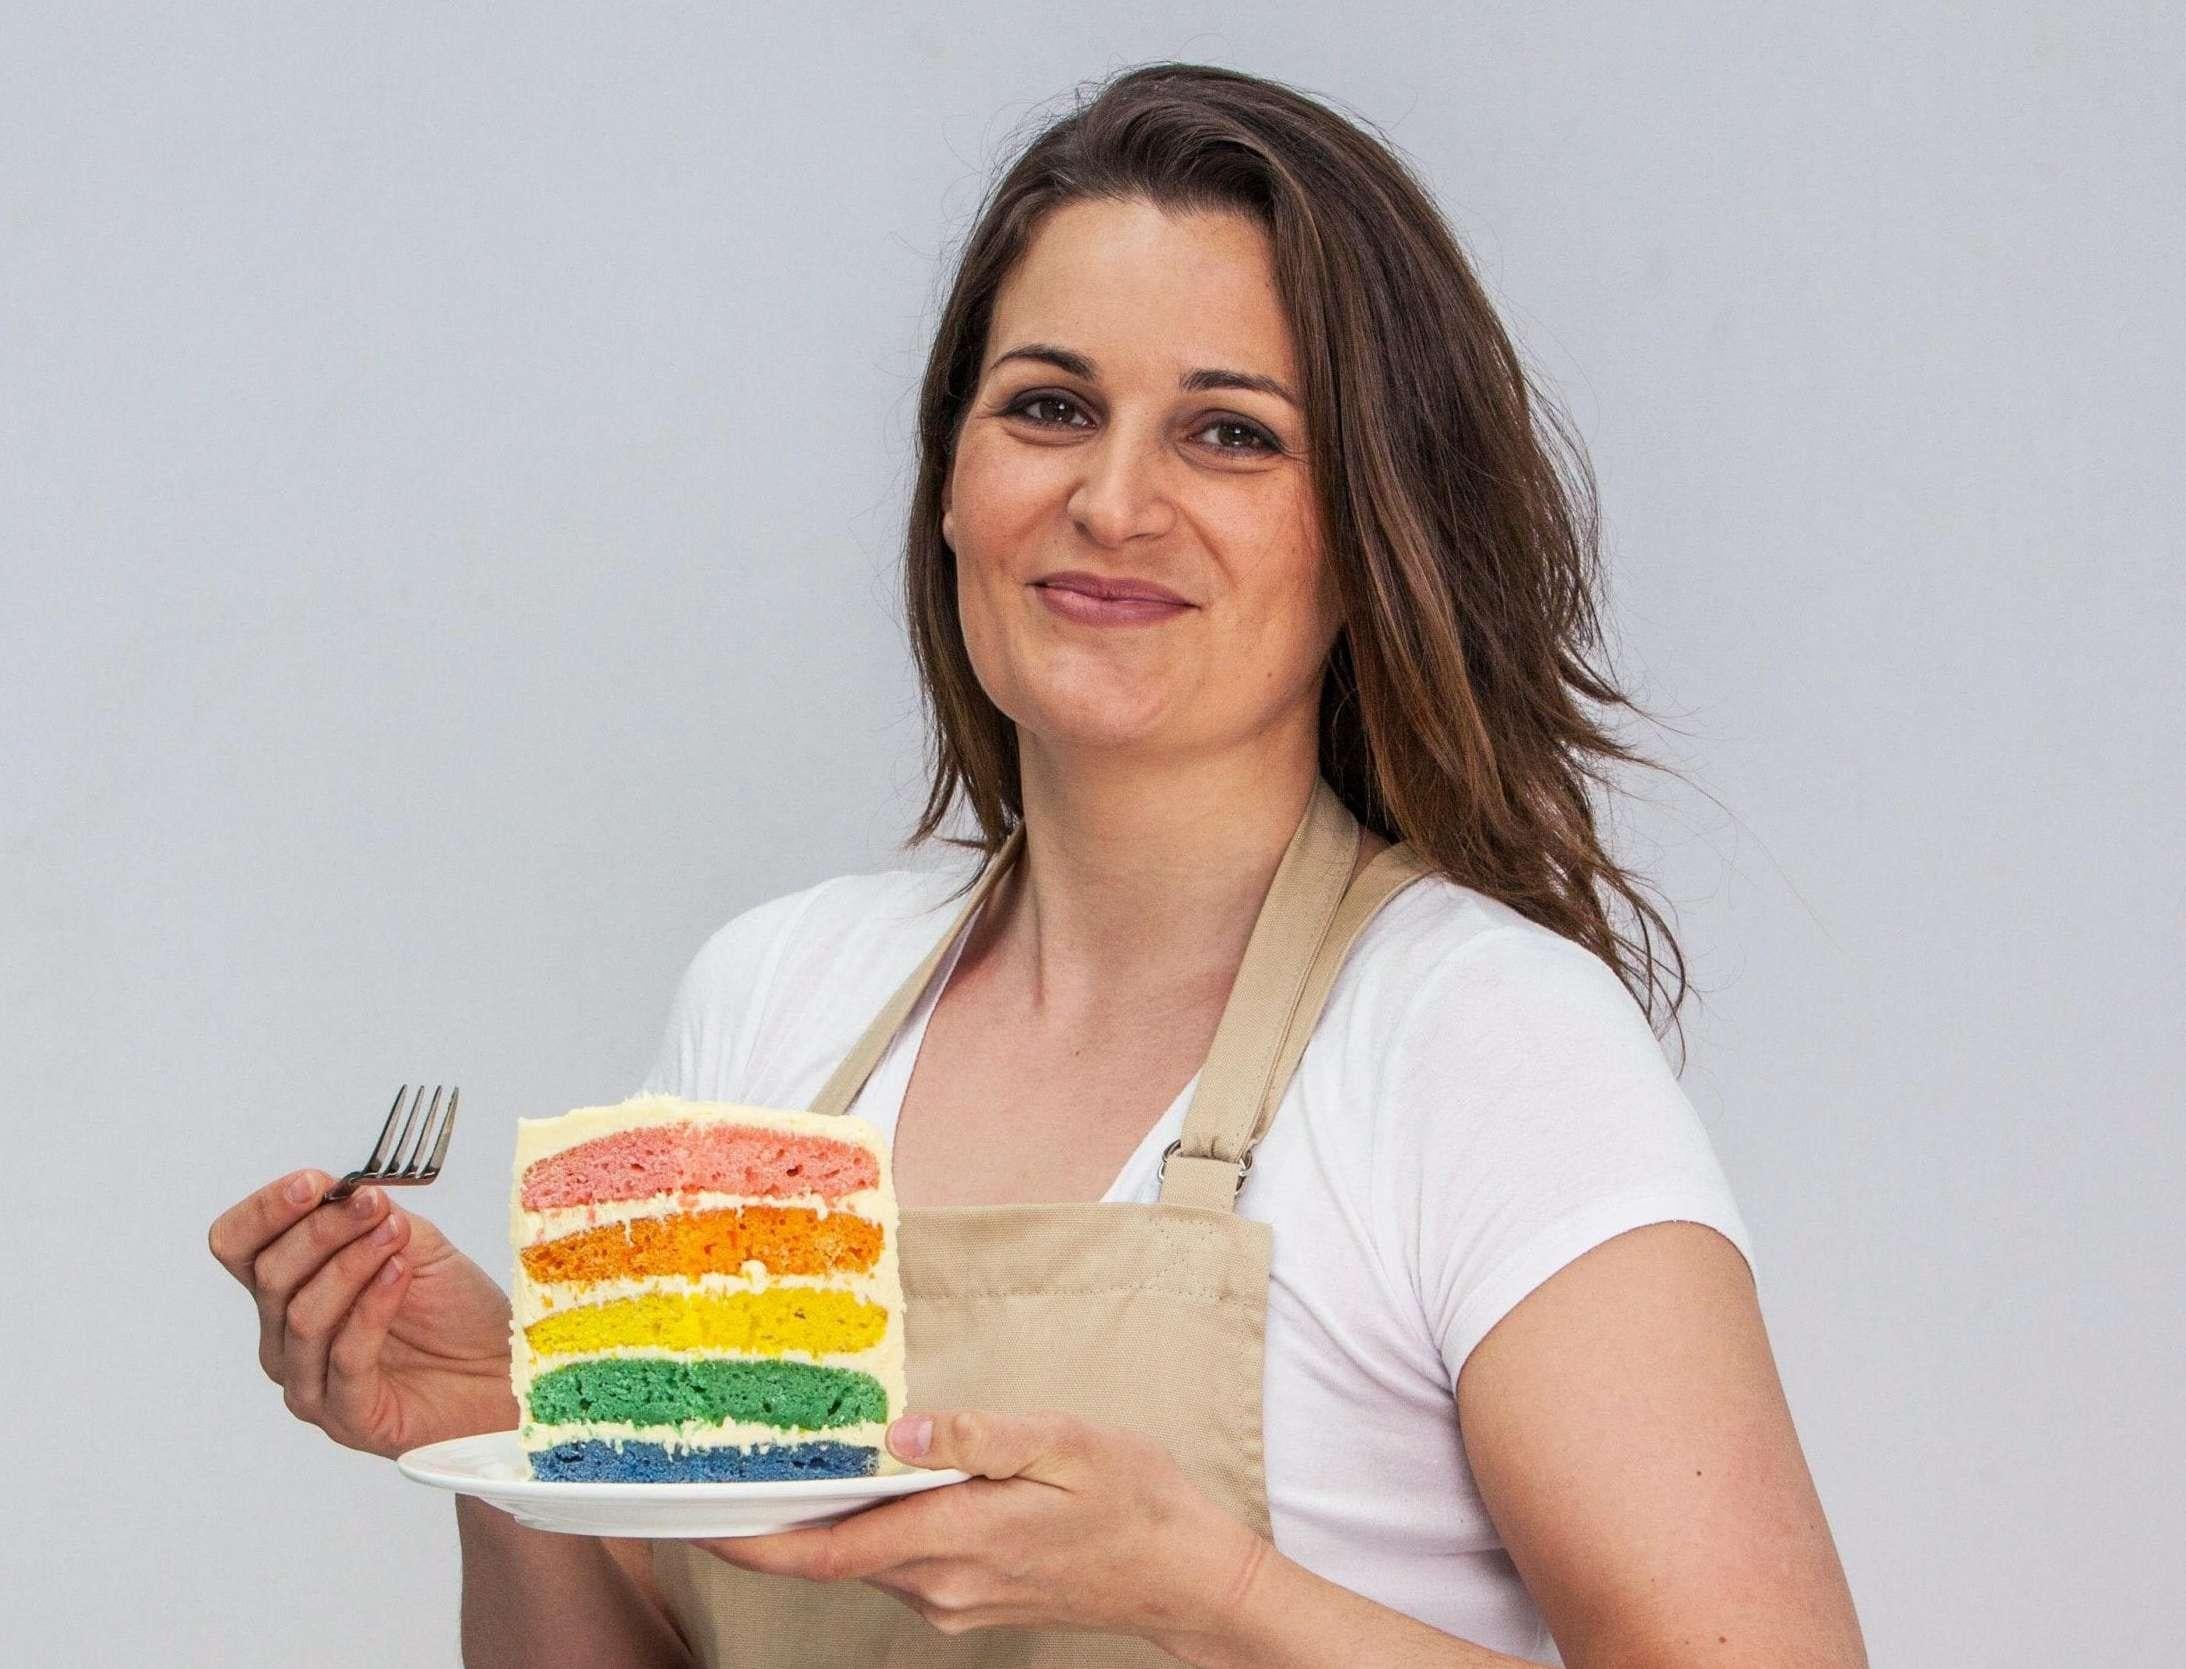 Sophie, who won the Great British Bake Off 2017